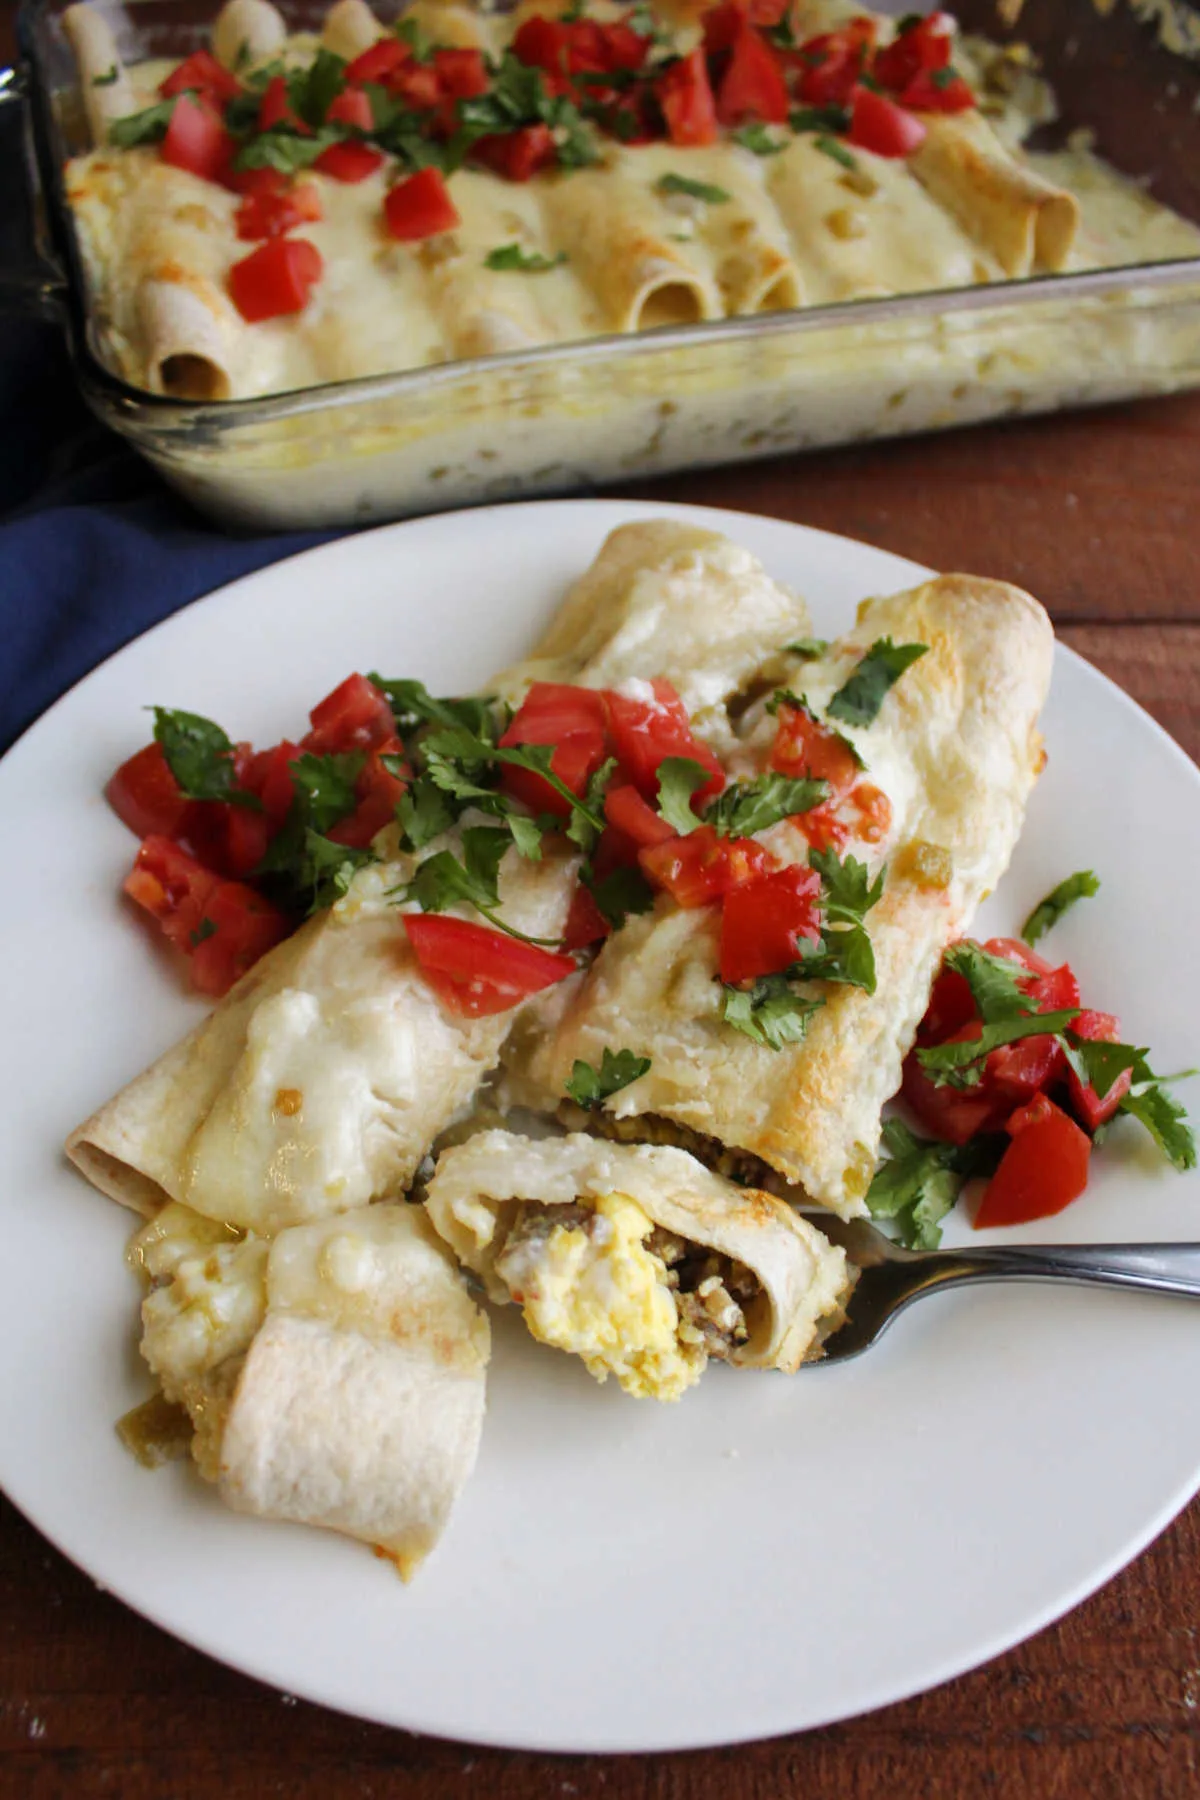 Bite of breakfast enchilada on fork showing scrambled eggs and sausage inside flour tortilla and white cheese sauce on top.